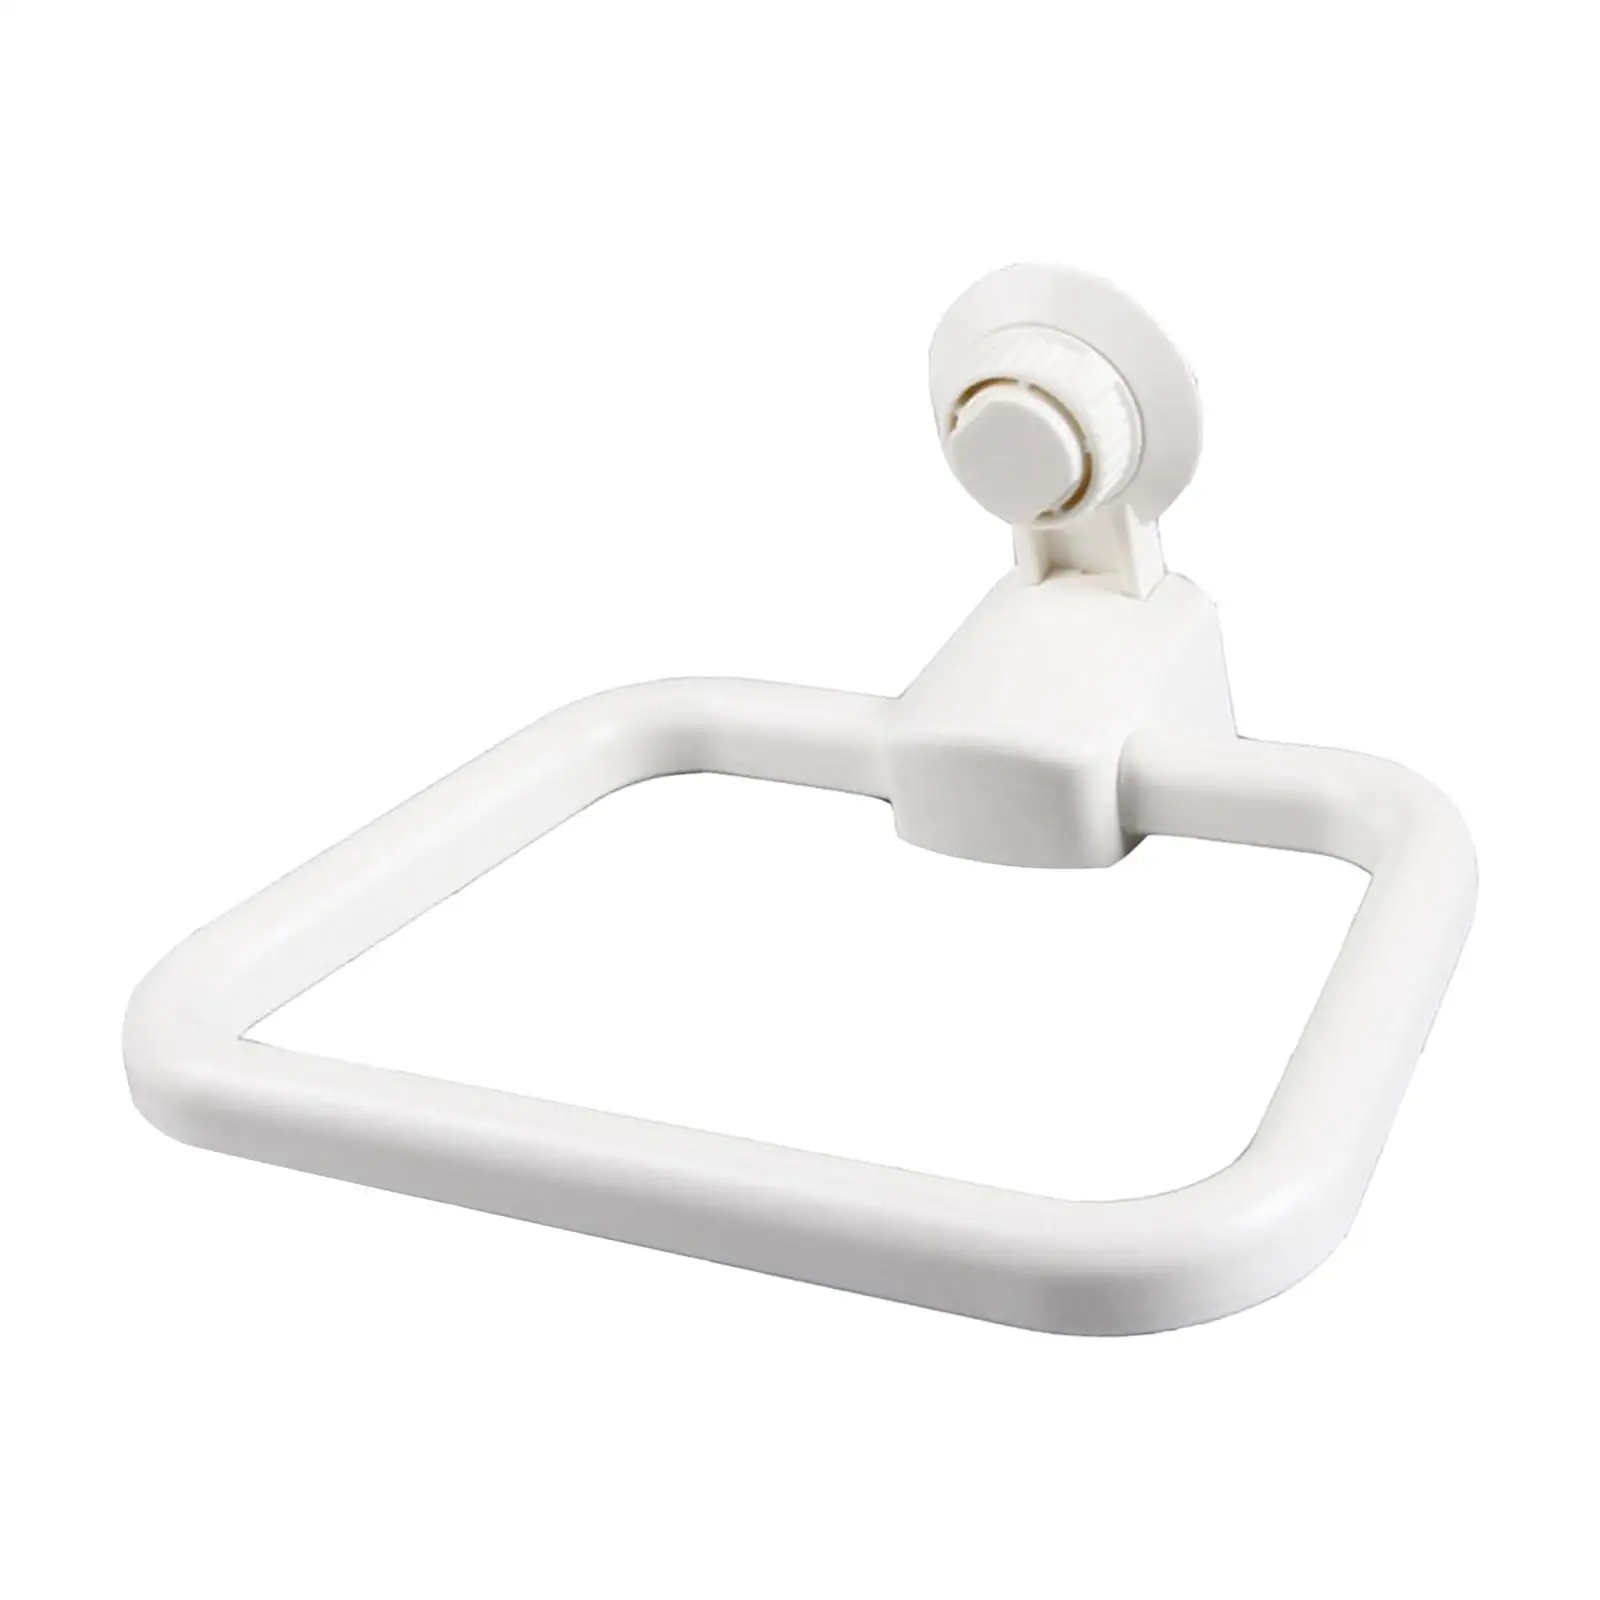 Vacuum Suction Towel Holder, Suction Towel Rings, Wall Mount Towel Rack for